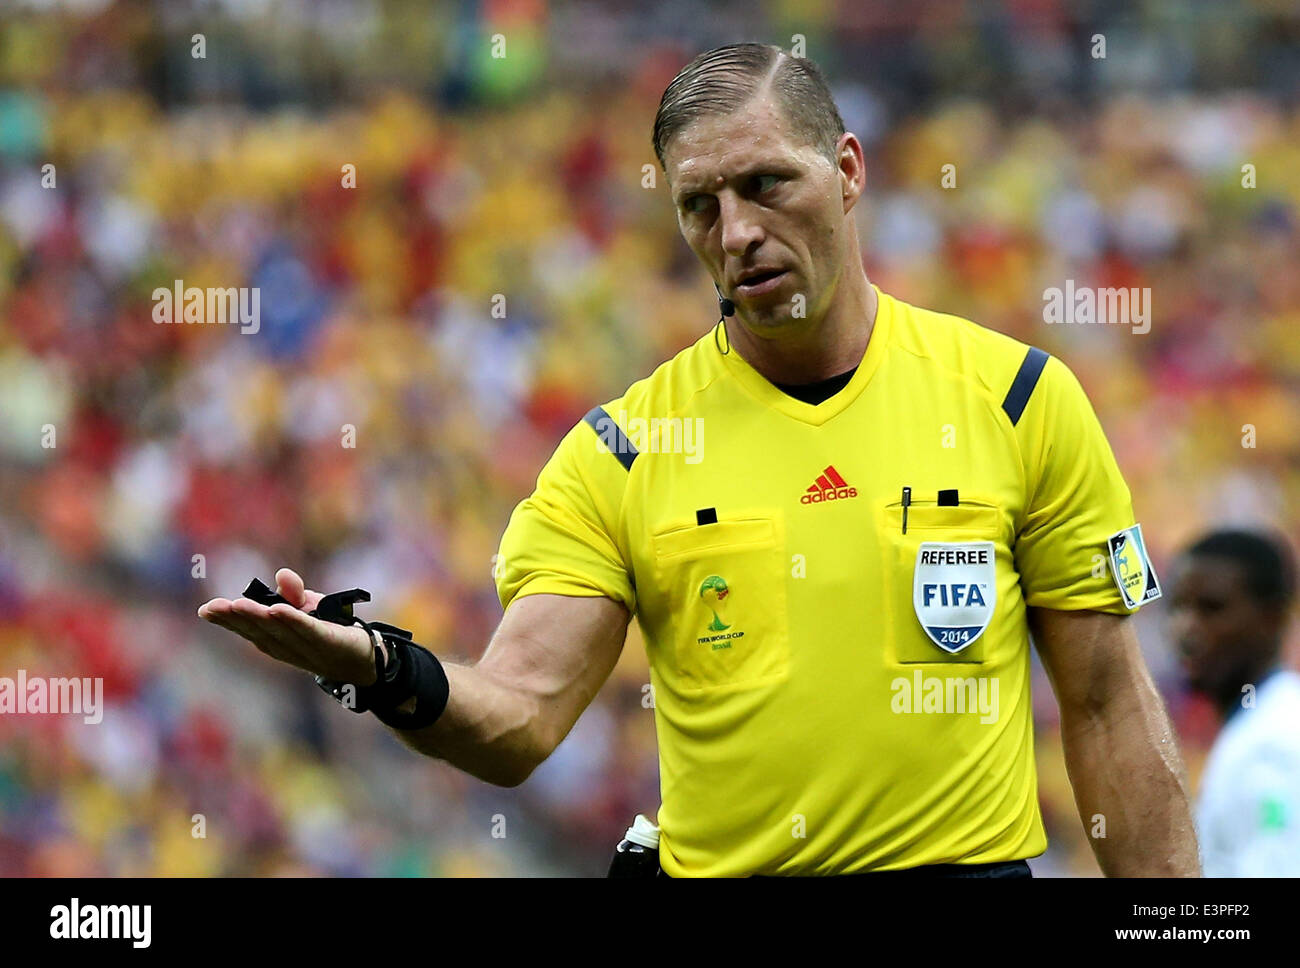 (140625) -- MANAUS, June 25, 2014 (Xinhua) -- Argentina's referee Nestor Pitana calls a foul during a Group E match between Honduras and Switzerland of 2014 FIFA World Cup at the Arena Amazonia Stadium in Manaus, Brazil, on June 25, 2014. Switzerland won 3-0 over Honduras on Wednesday. (Xinhua/Li Ming)(pcy) Stock Photo